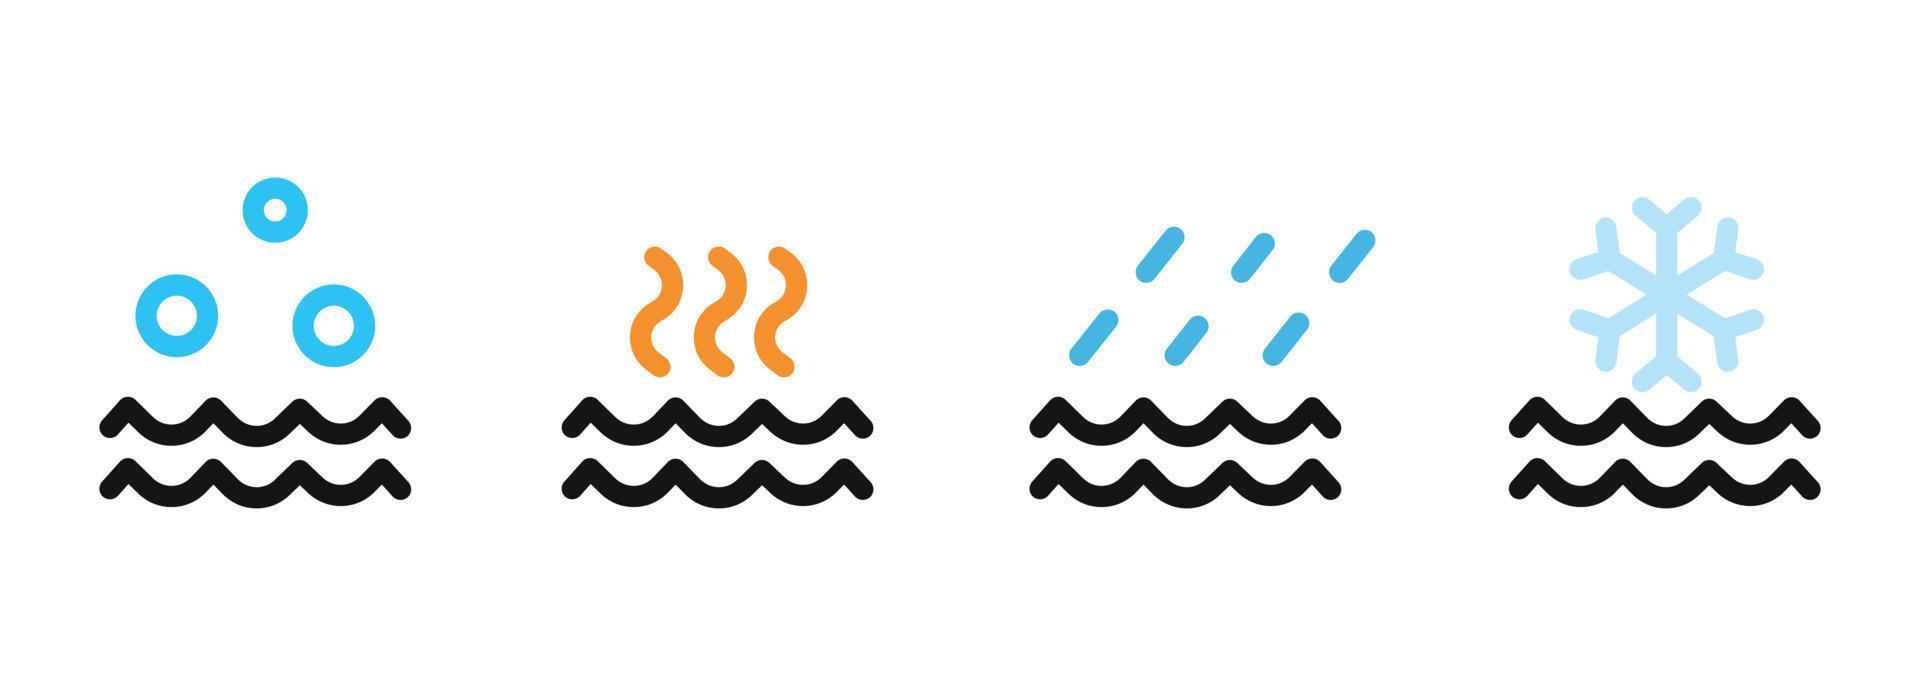 set of various water icon design. simple weather symbol for design element vector